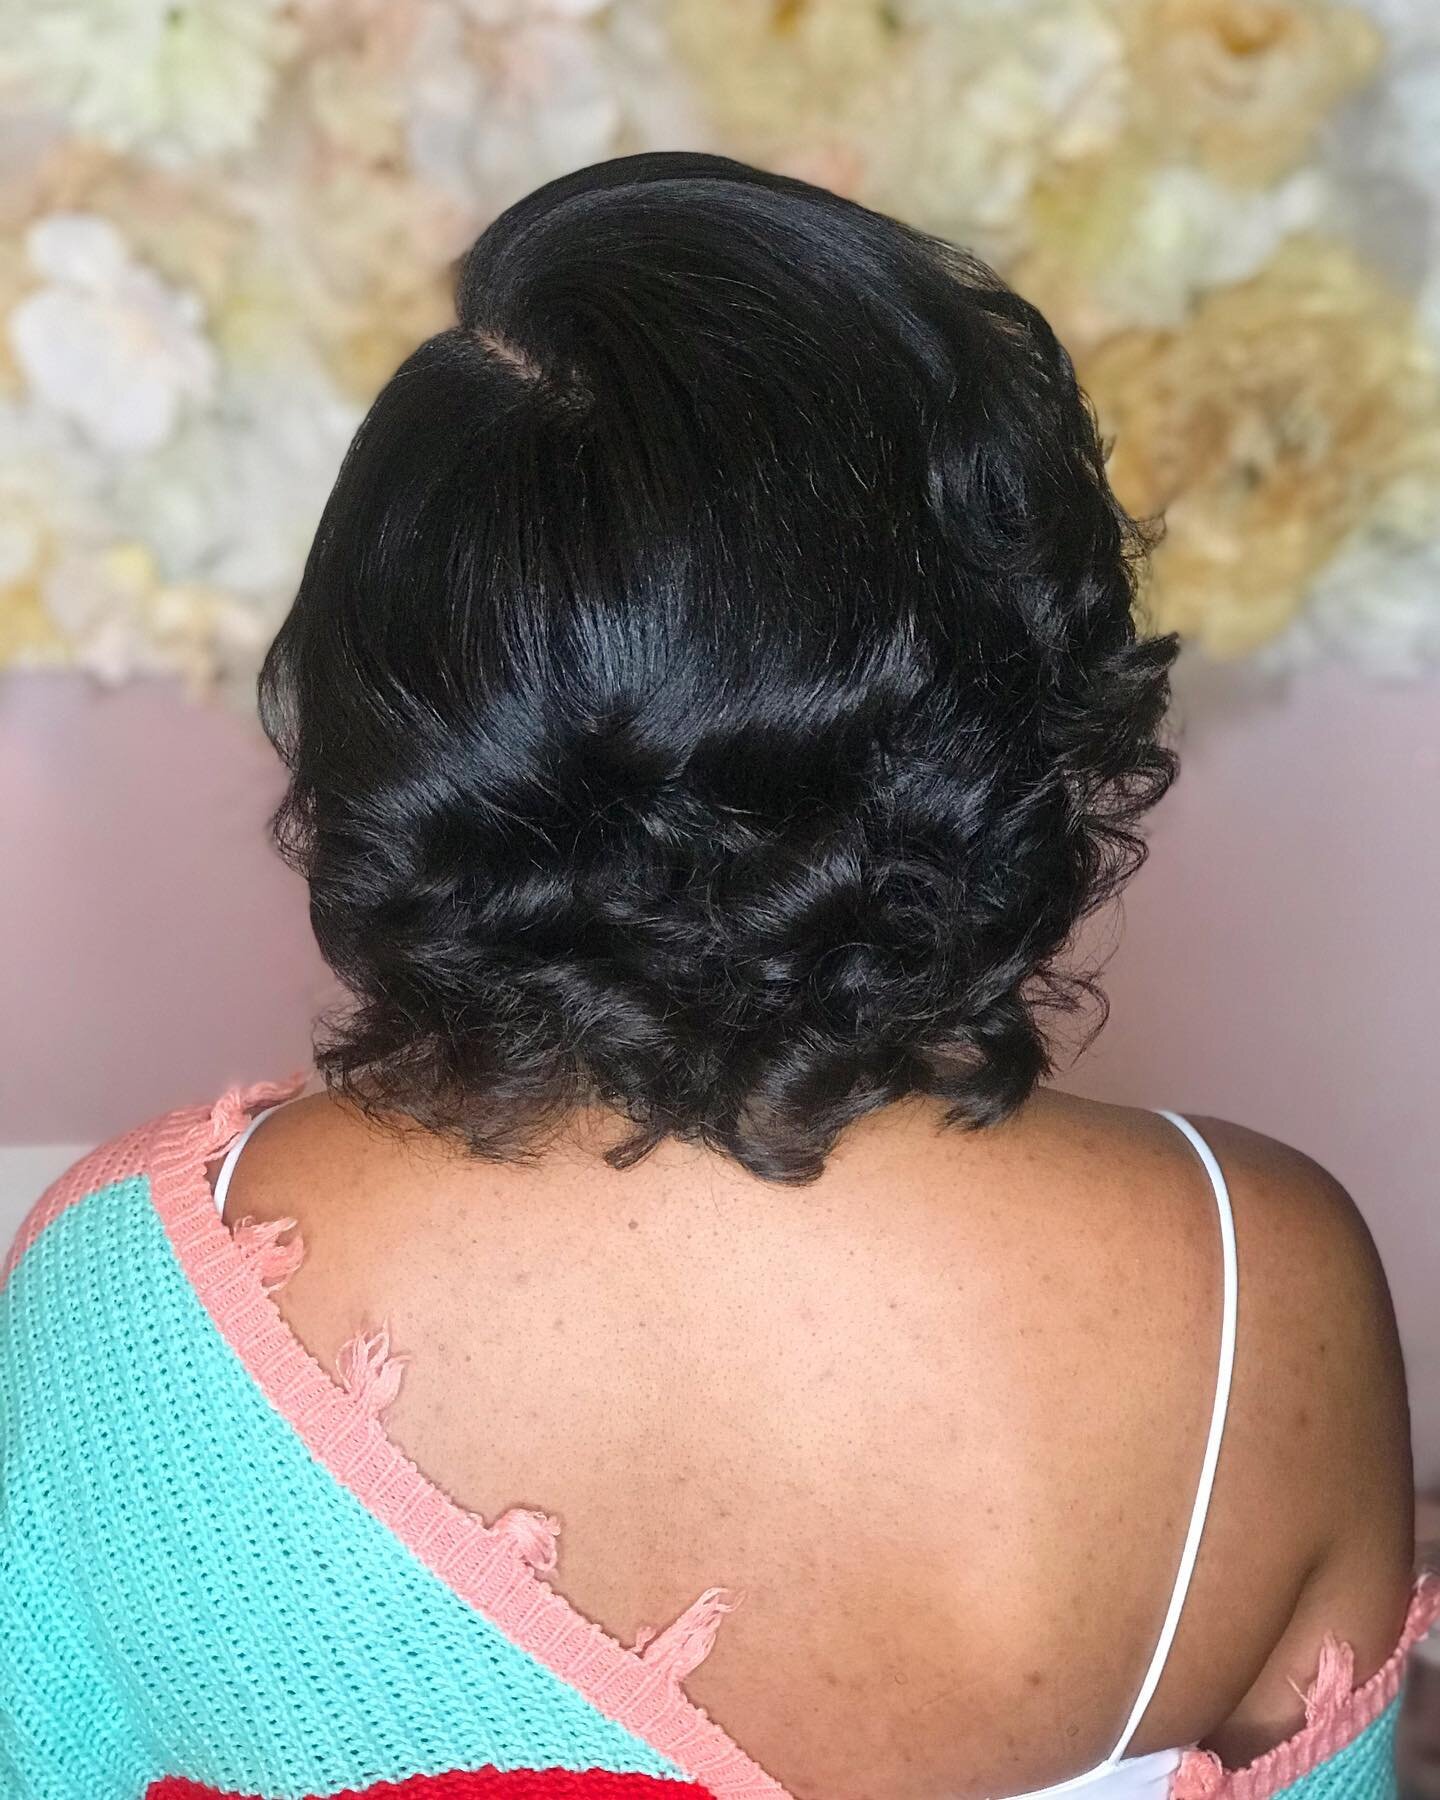 Classic SilkPress ✨
Laying the foundation of great vibes &amp; great hair💫
This beauty booked as a New Client and left feeling clear that this was the place for her🤍 The thought alone of having to struggle with your own natural hair is stressful en